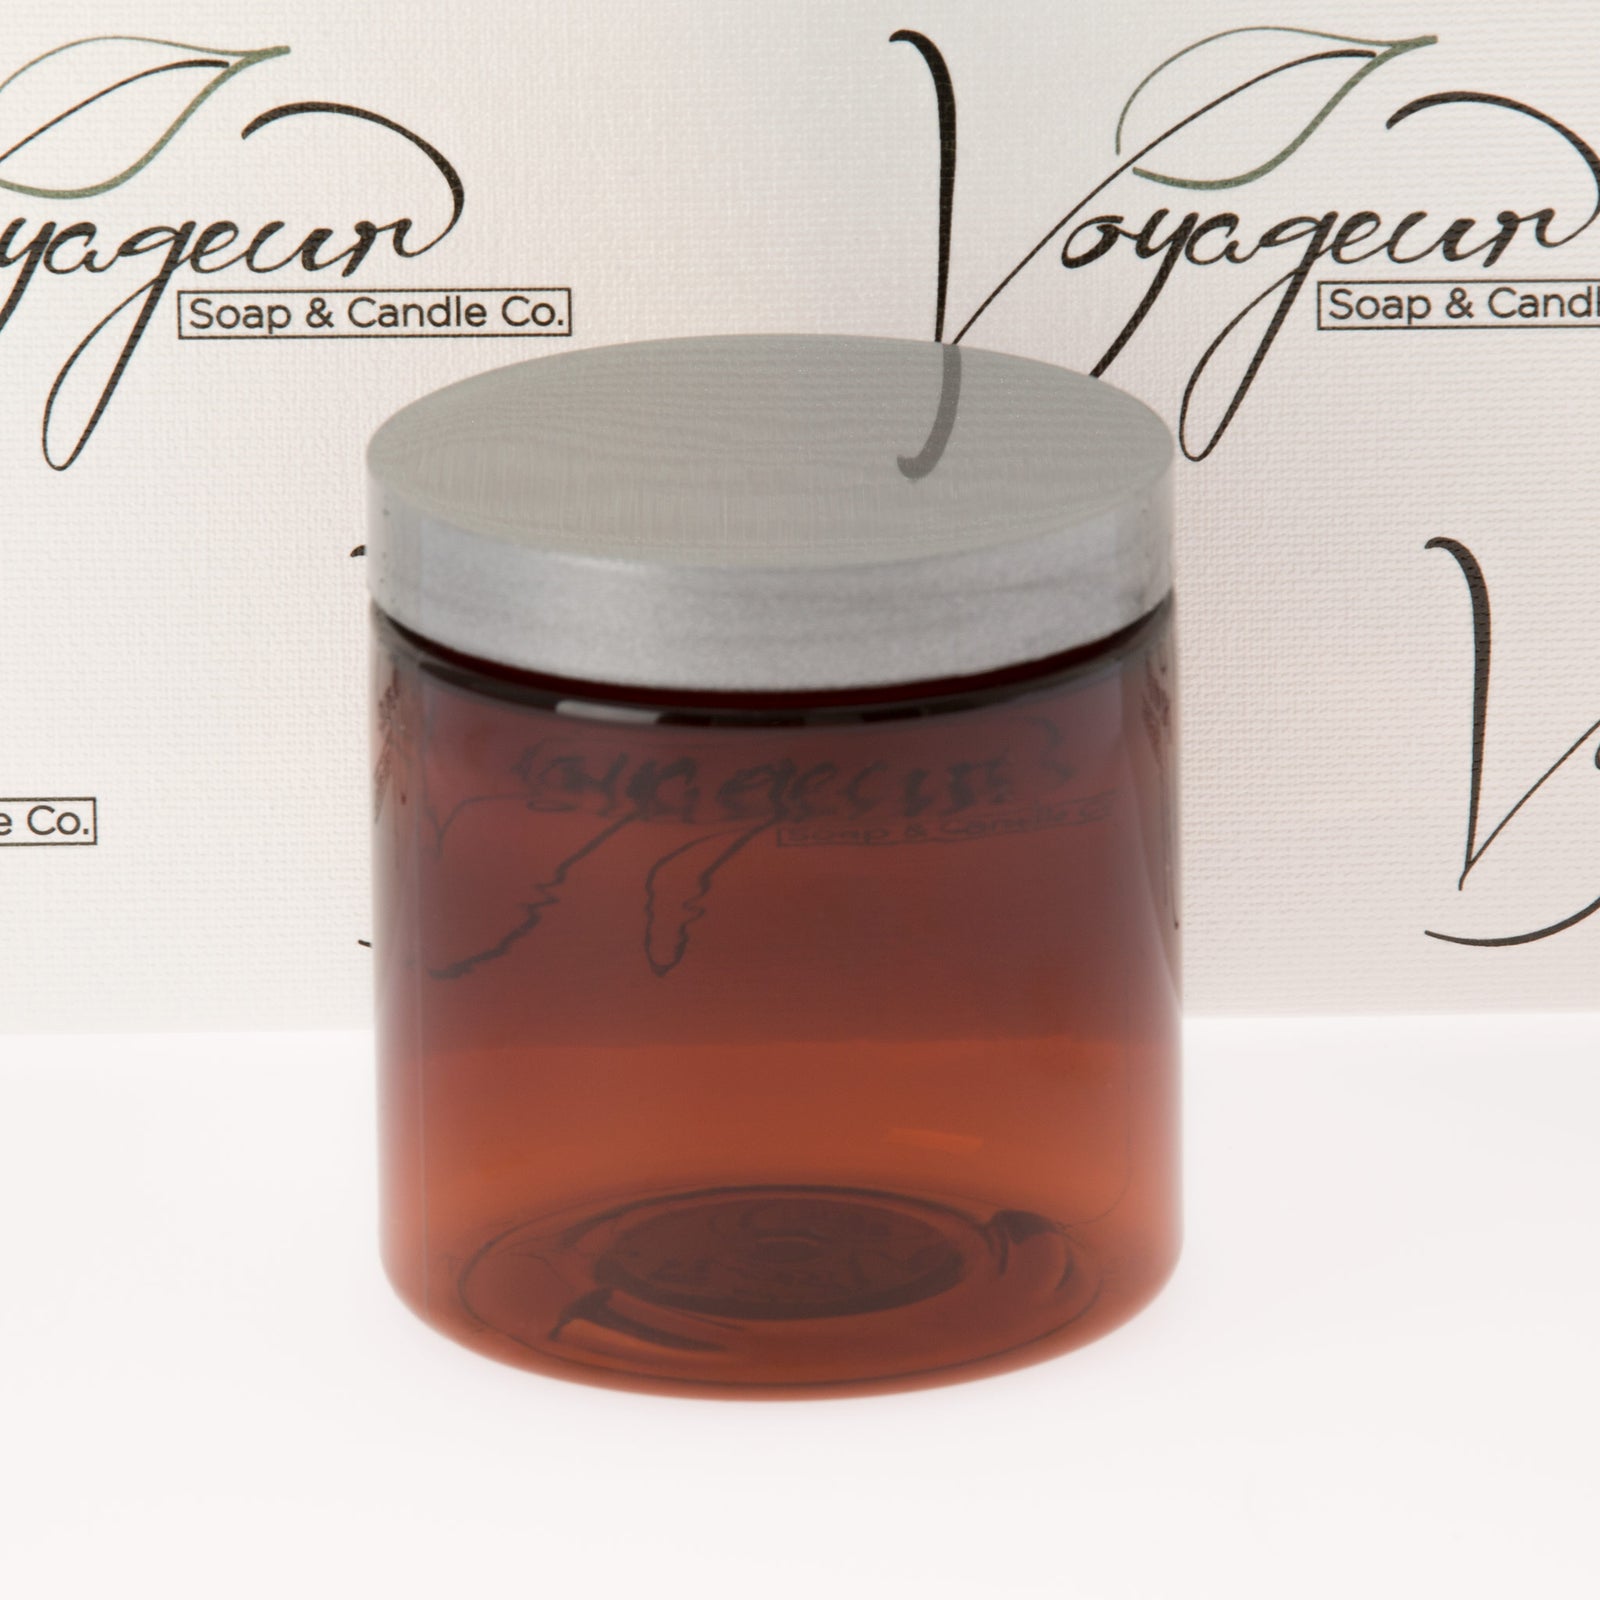 8 oz Amber Straight Sided Jar with Silver Flat Gloss Smooth Cap